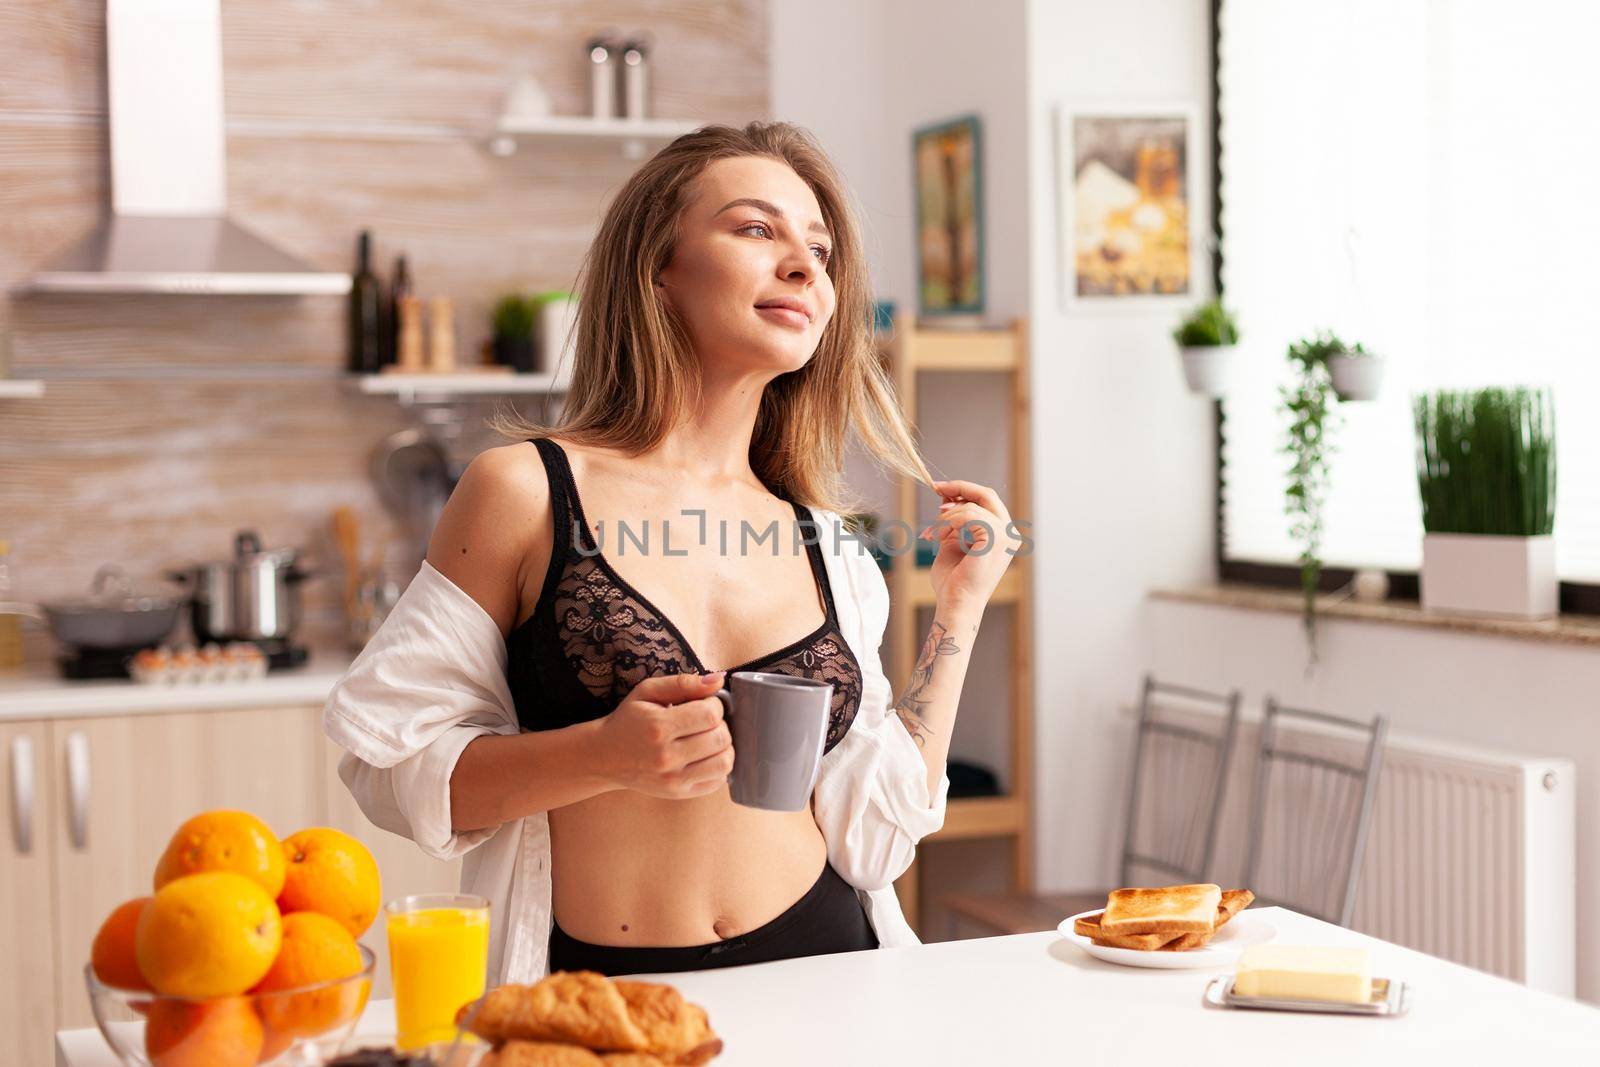 Woman wearing sexy bra during breakfast in home kitchen. Young attractive woman with tattoos in seductive underwear holding cup of tea relaxing in the kitchen smiling.